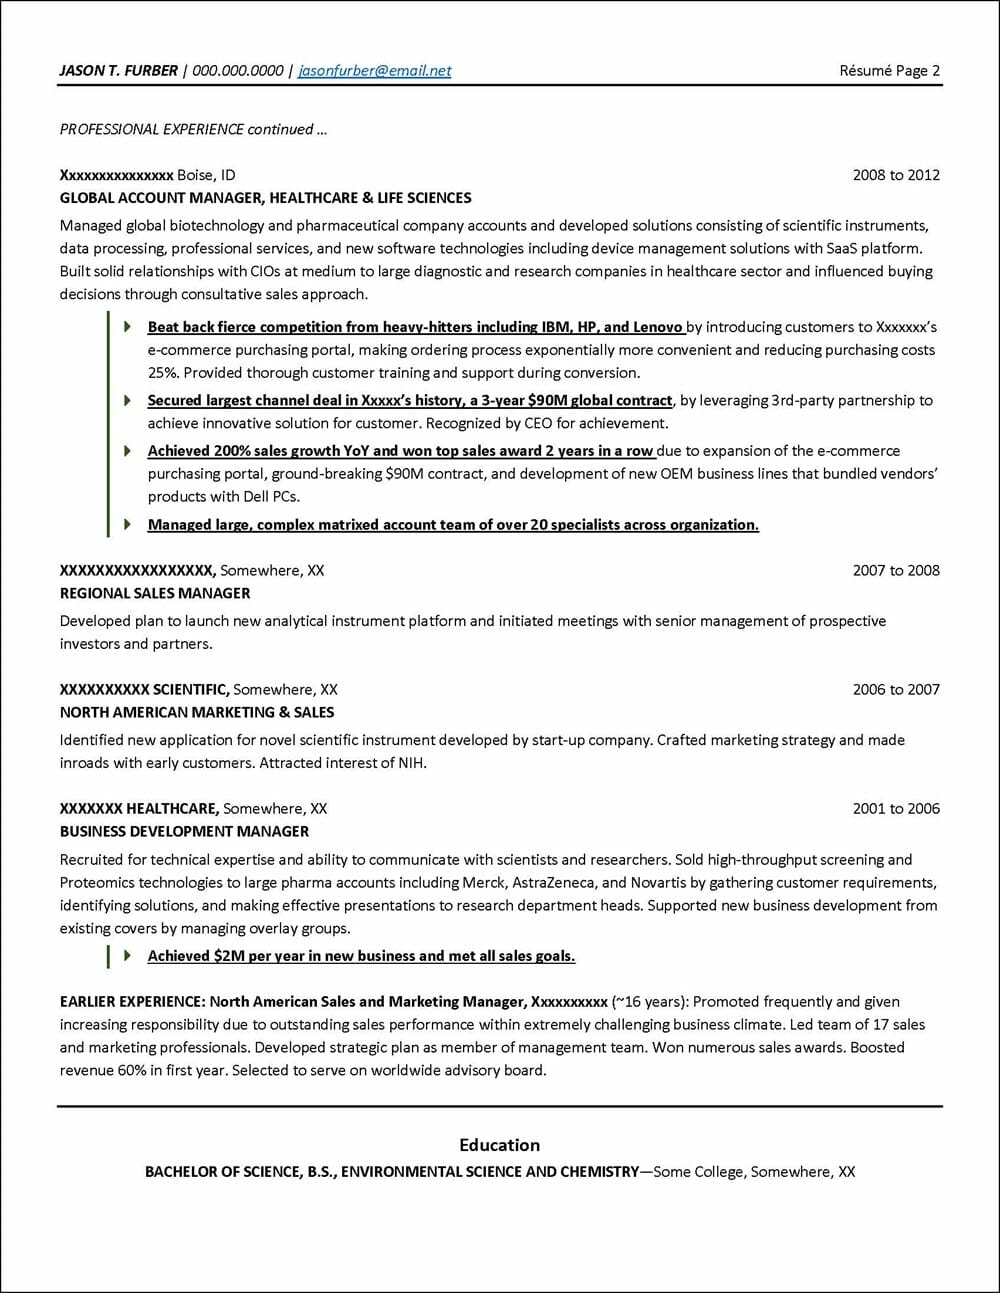 Business Development Manager Resume Page 2